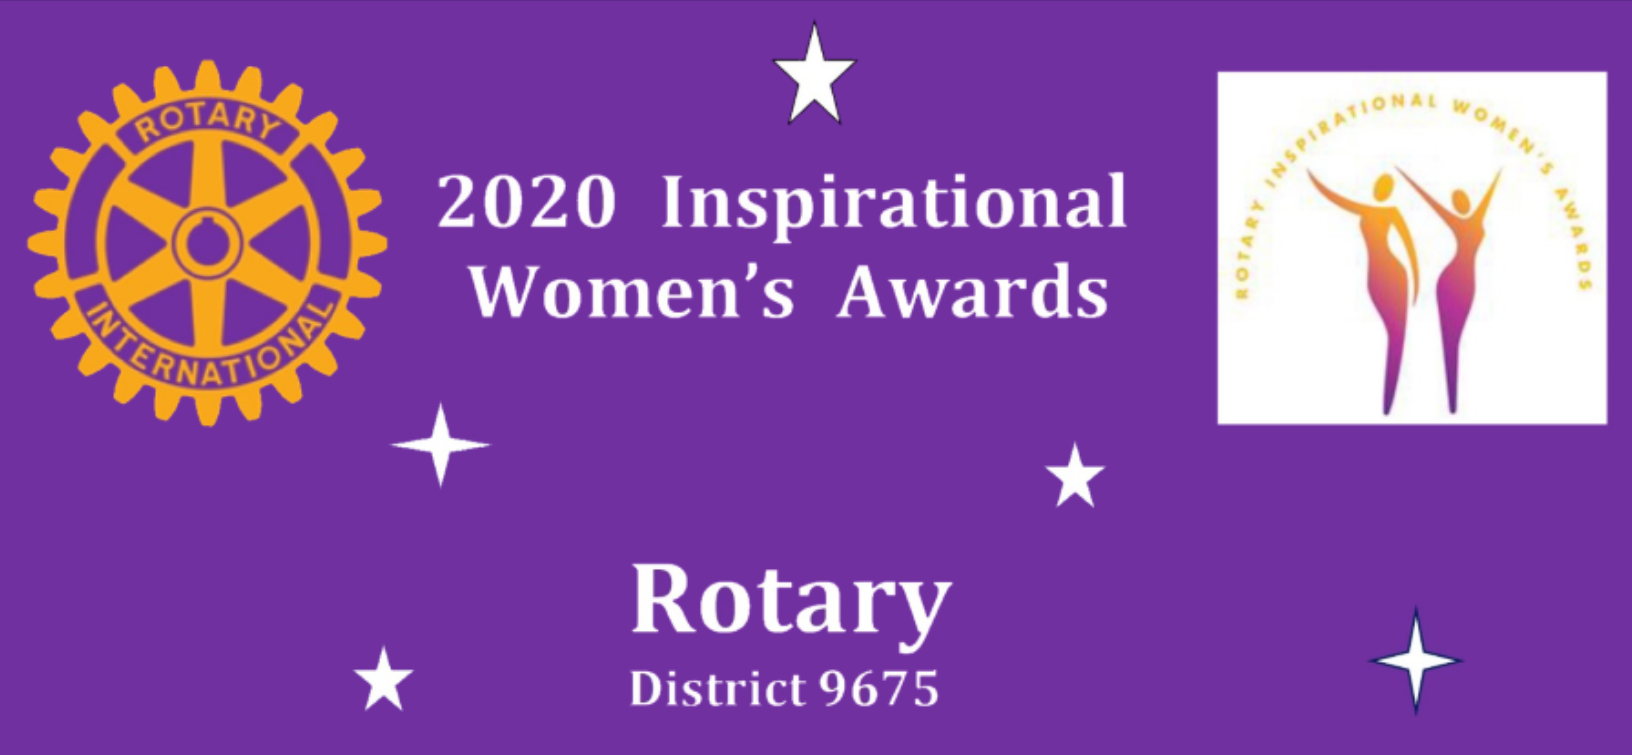 NSW INSPIRATIONAL WOMEN’S AWARDS 2020 Rotary Club of Concord